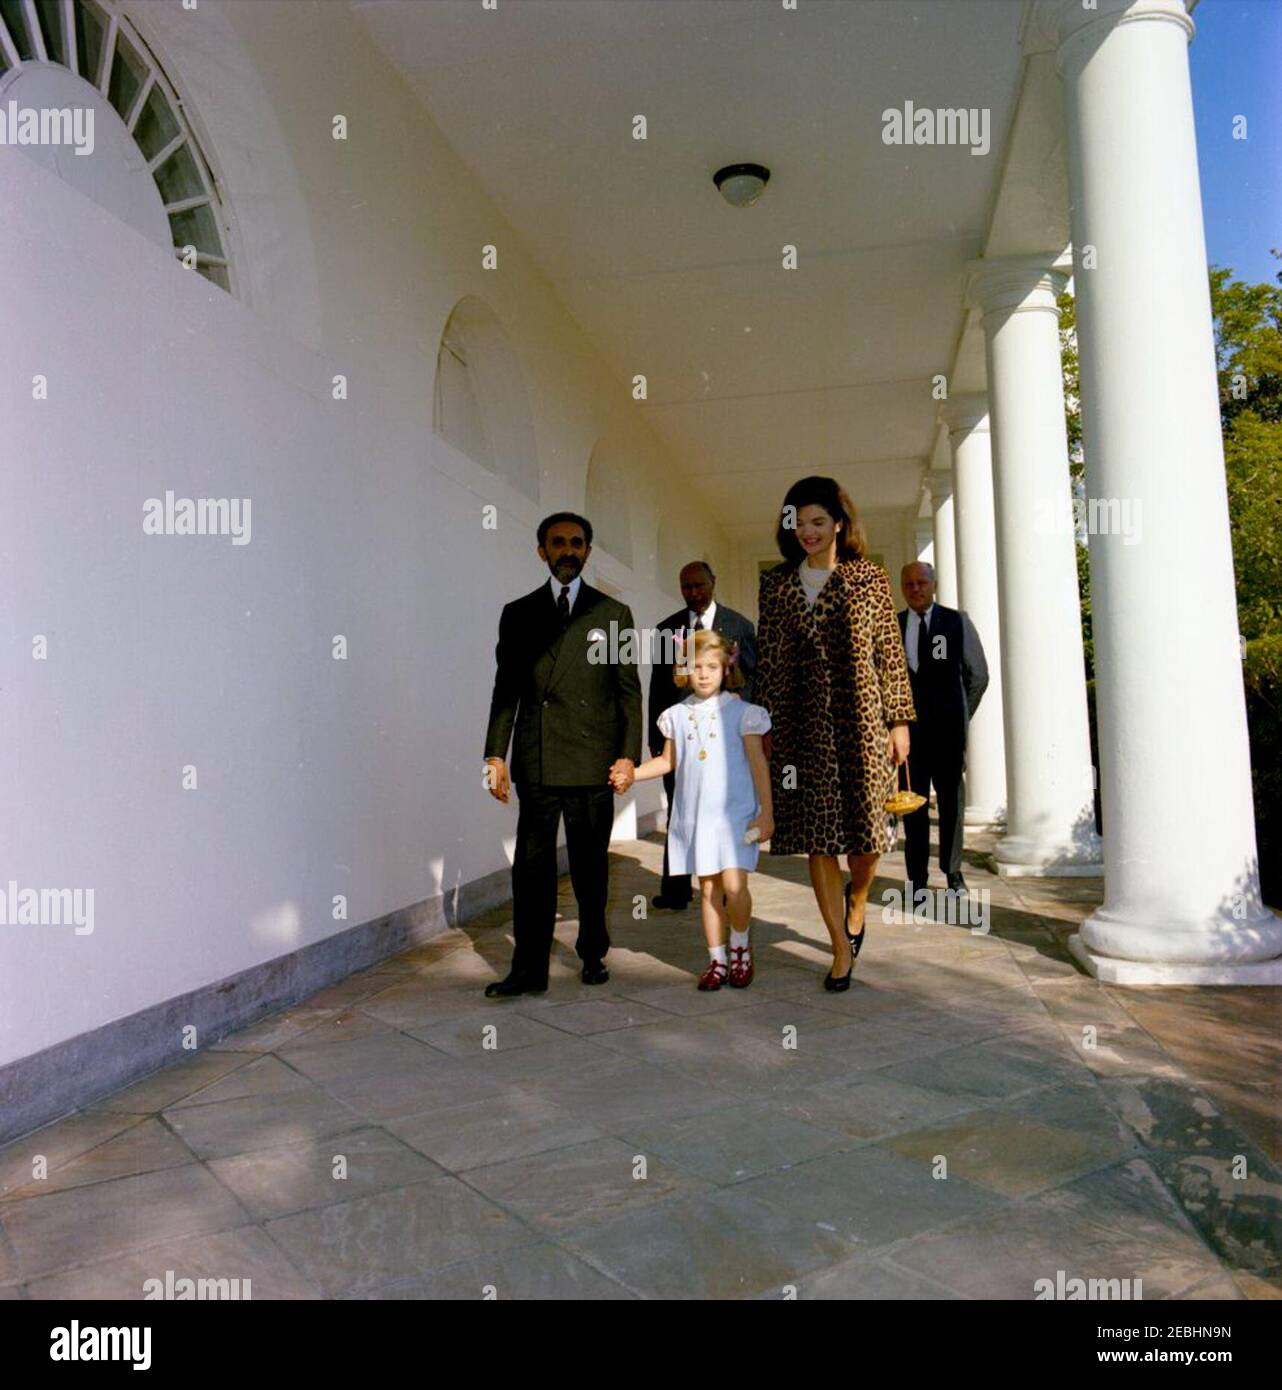 Meeting with Haile Selassie I, Emperor of Ethiopia, 4:33PM. First Lady Jacqueline Kennedy walks with Emperor of Ethiopia, Haile Selassie I, and Caroline Kennedy along the West Wing Colonnade of the White House. Walking behind are Minister of the Imperial Court of Ethiopia, Tafarra-Worq Kidane-Wold, and U.S. State Department Protocol officer, Jay Rutherfurd. Emperor Selassie presented as gifts to the Kennedy family a leopard coat and gold filigree jewelry case for Mrs. Kennedy and carved ivory figurines for Caroline and John F. Kennedy, Jr. Washington, D.C. Stock Photo